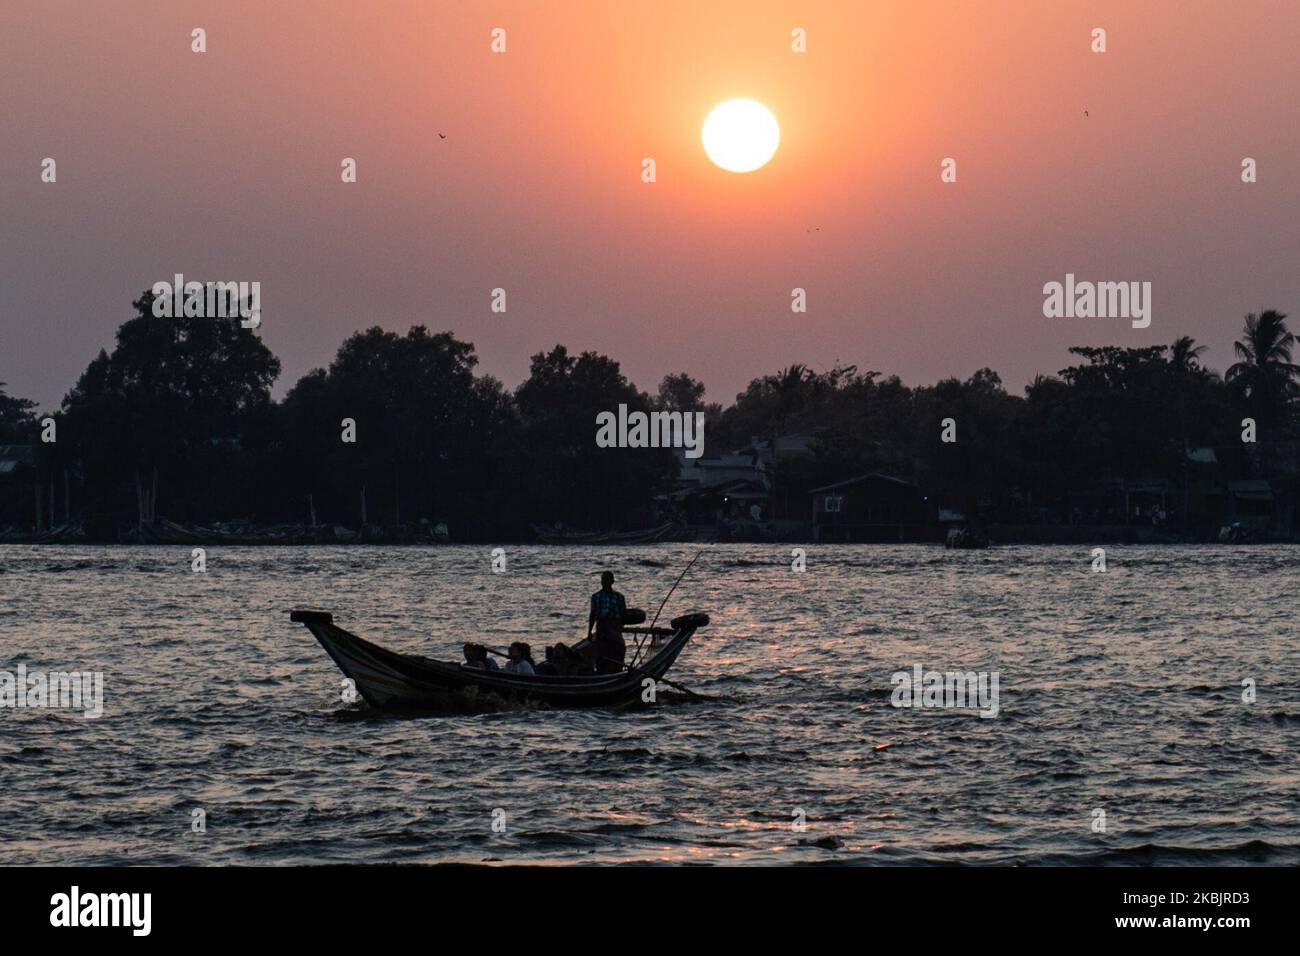 A boat crosses a river during the sunset in Yangon, Myanmar on March 10, 2020. (Photo by Shwe Paw Mya Tin/NurPhoto) Stock Photo